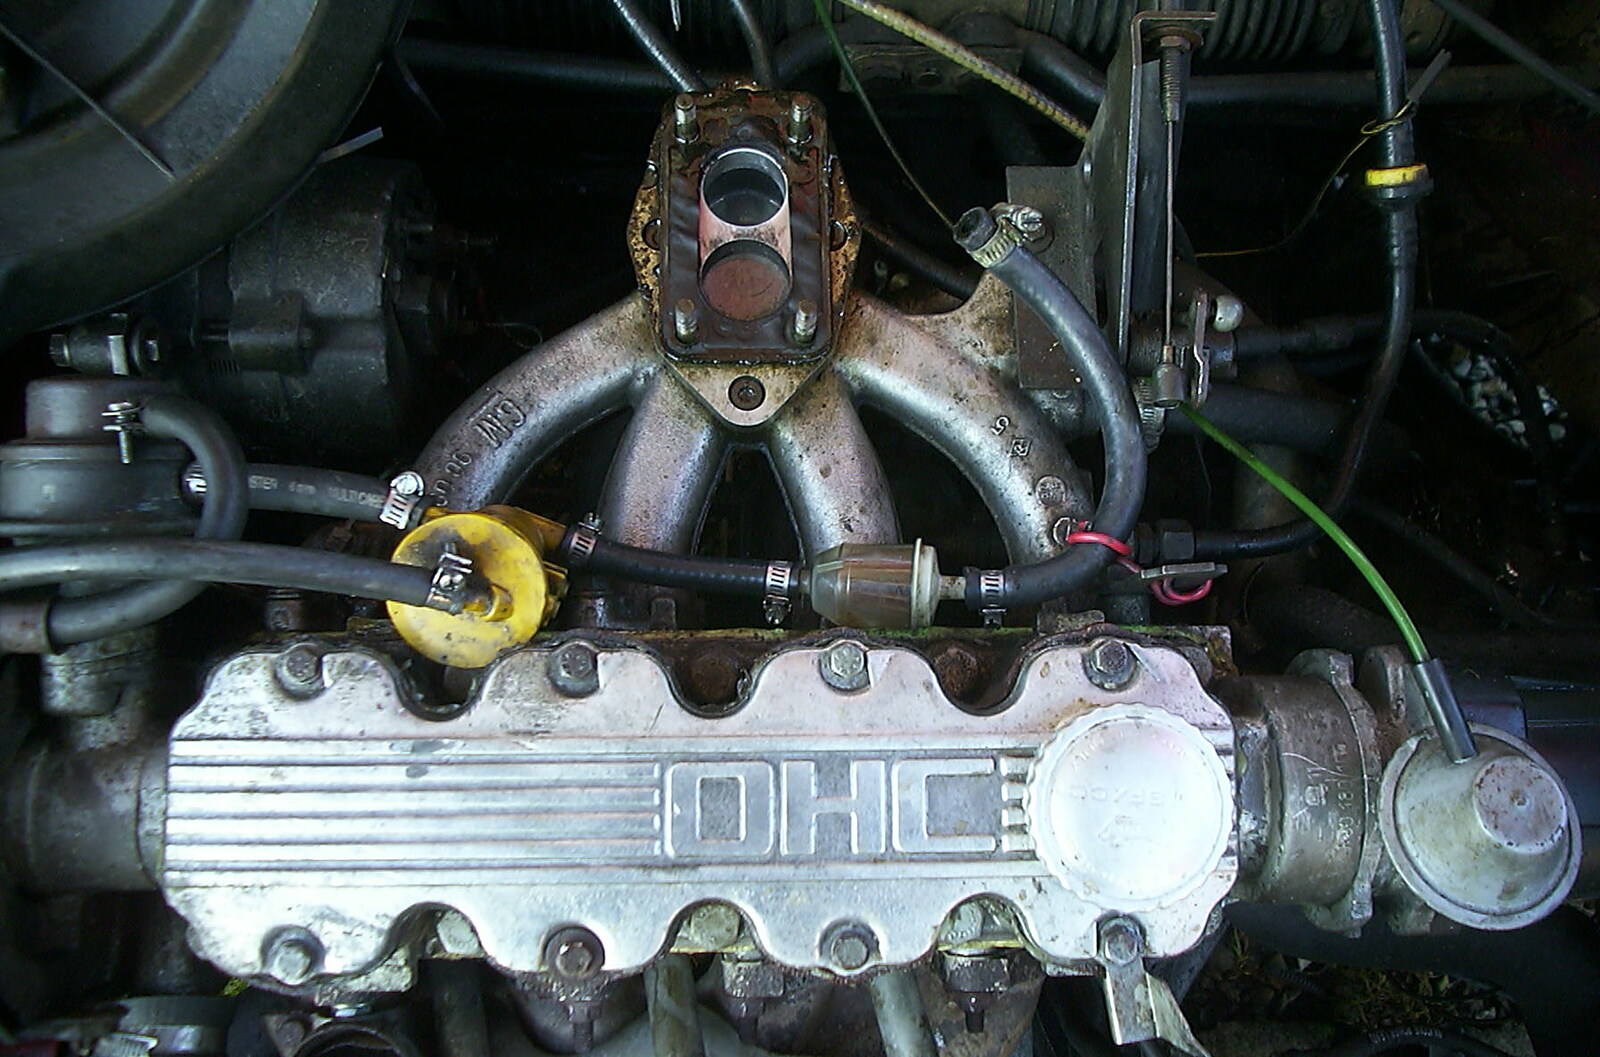 The inlet manifold of the k-series Astra engine from The House in Snow and a Carburettor, Brome, Suffolk - 20th December 2002